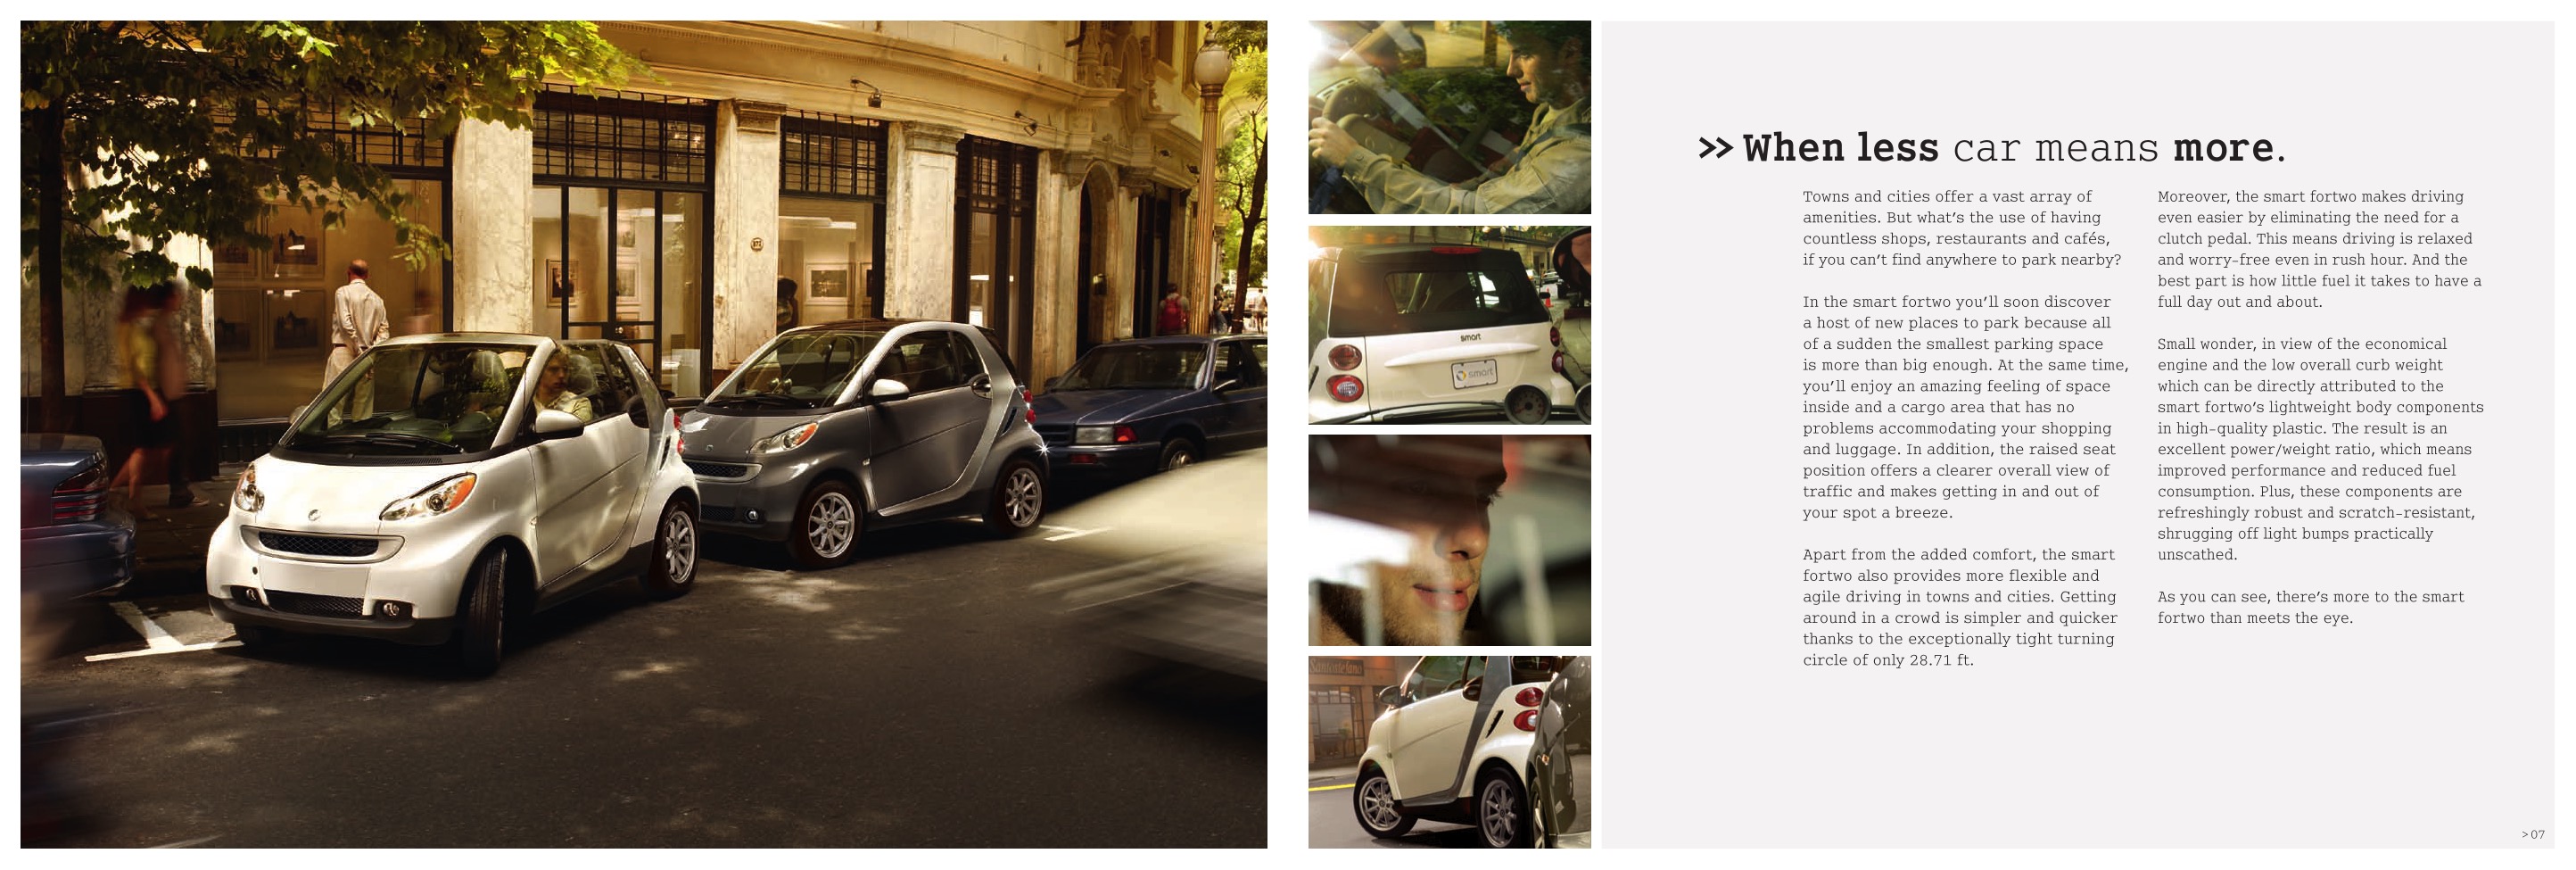 2009 Smart Fortwo Brochure Page 1